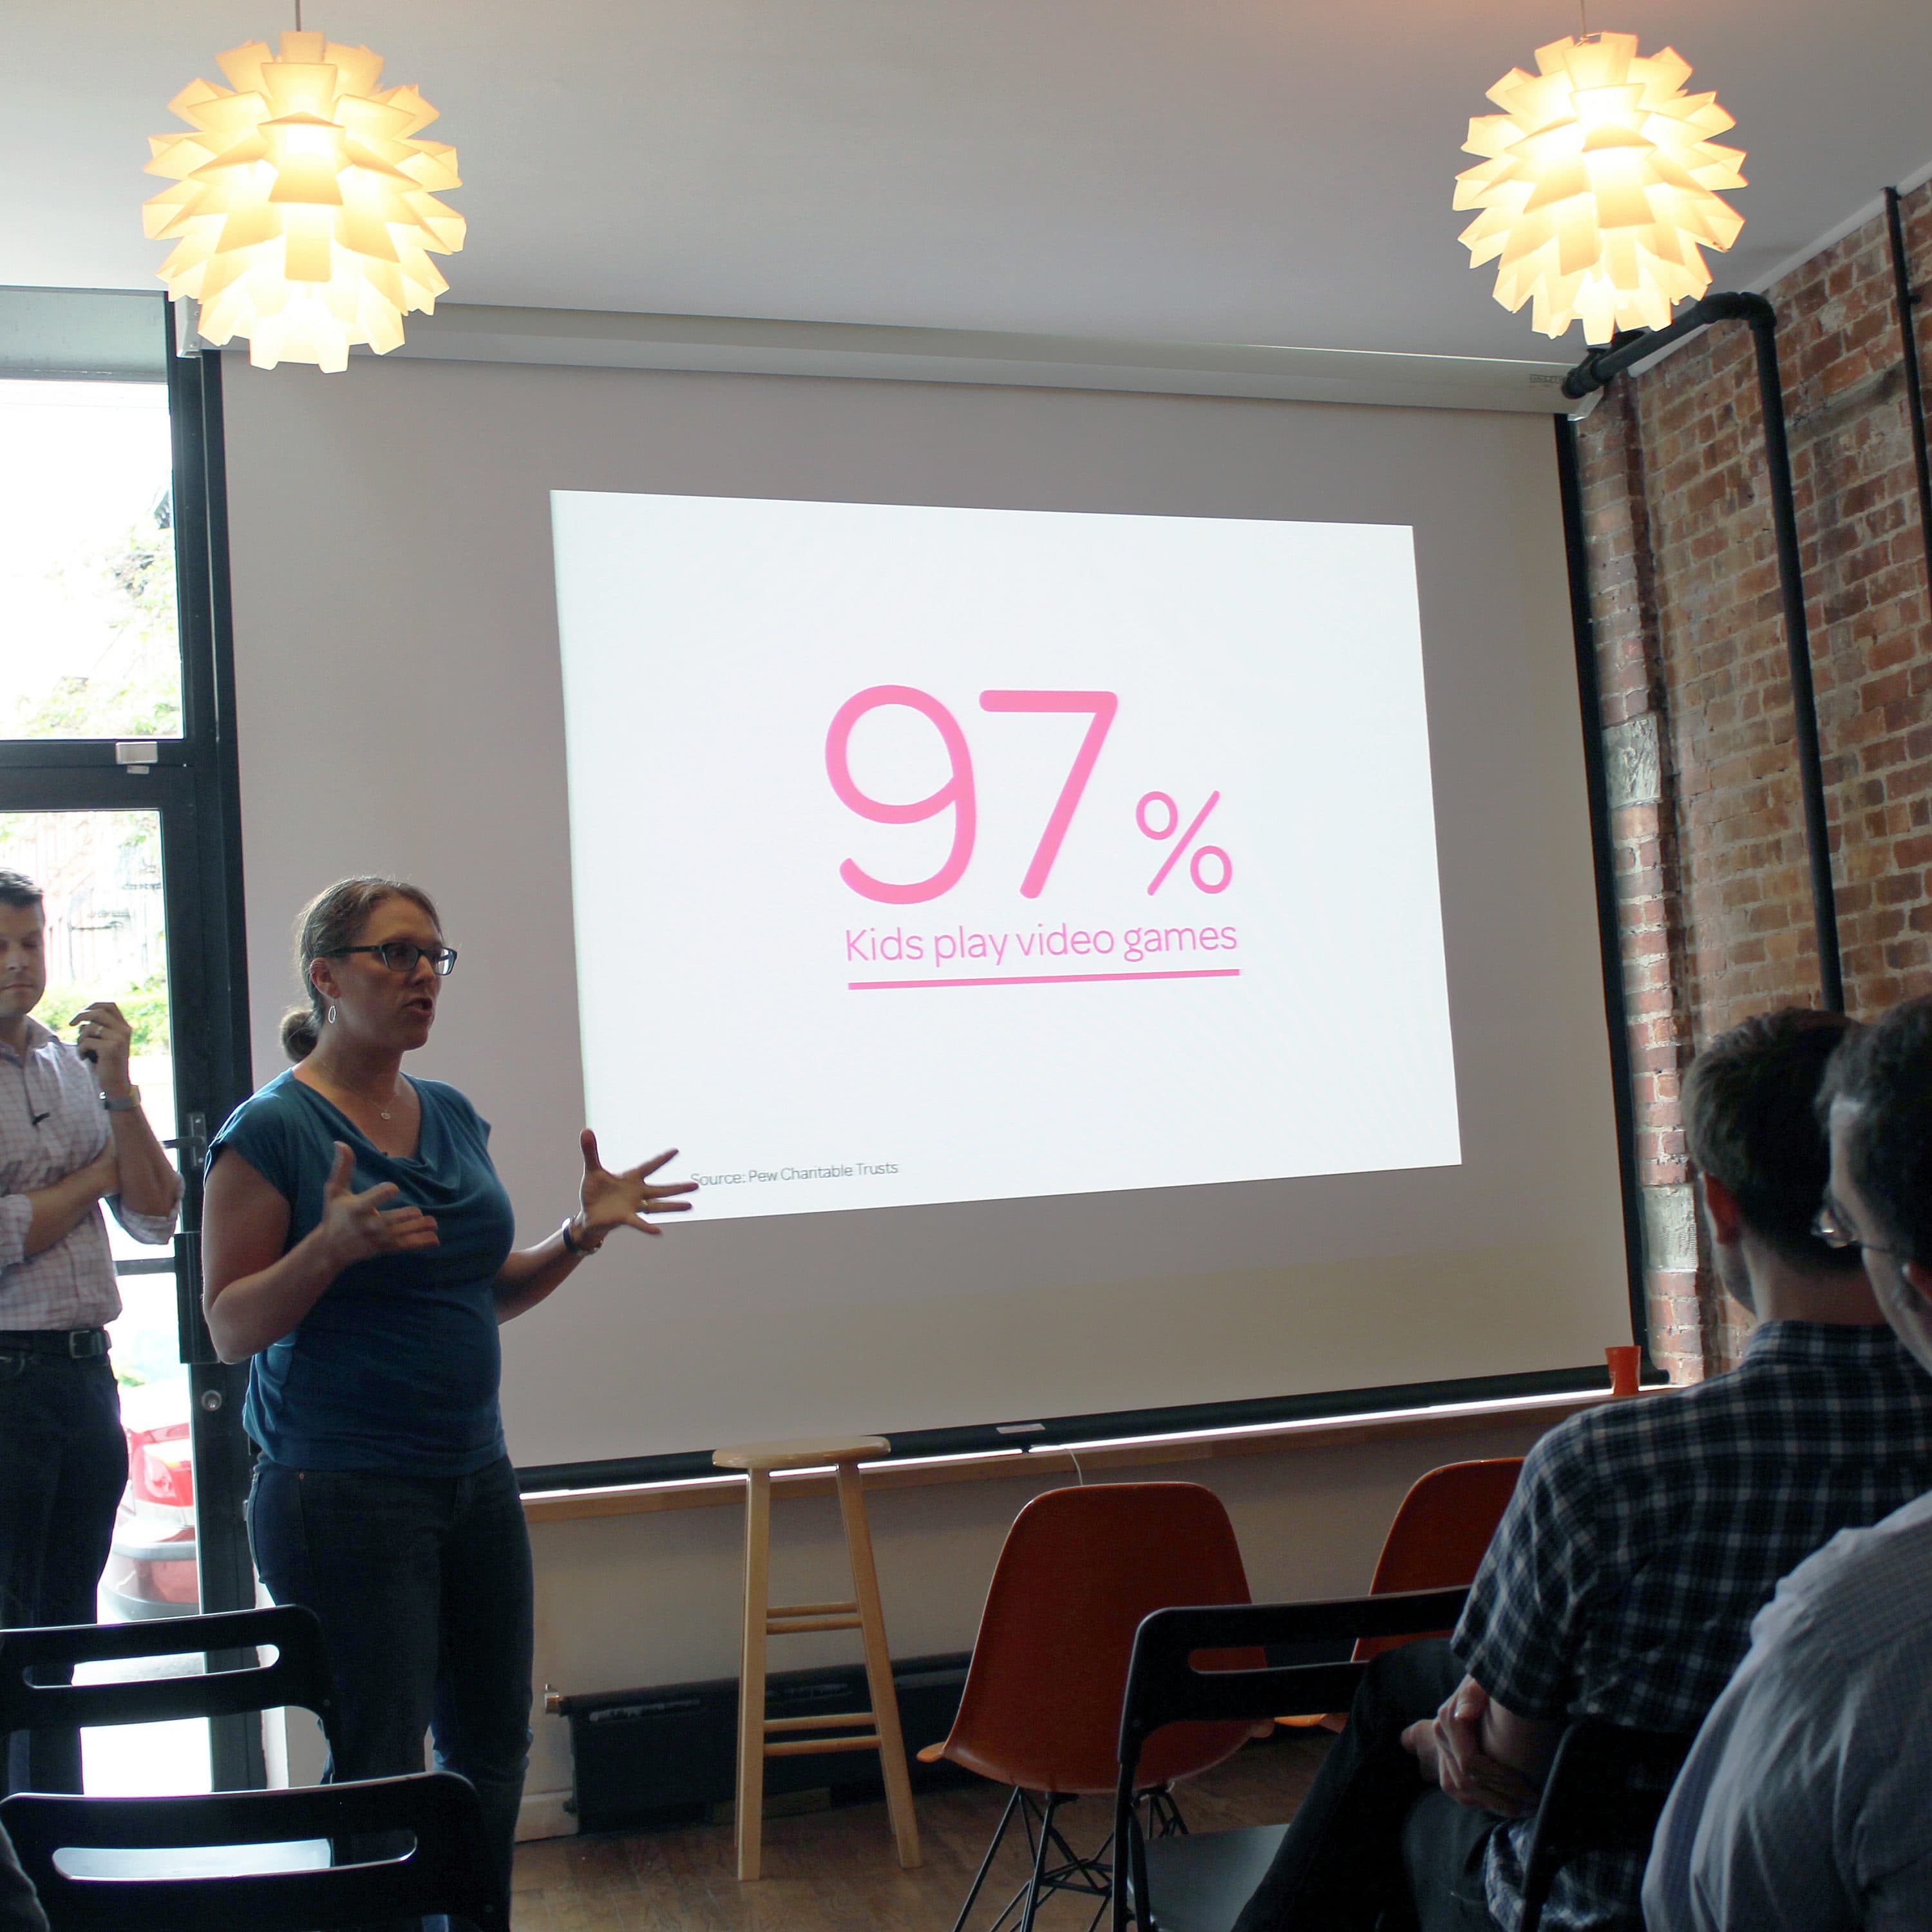 A woman is giving a presentation in a room with a brick wall and two hanging lights. A slide on the screen behind her reads "97% Kids play video games." Several people are seated, listening attentively. A man stands near the door, watching the presentation.